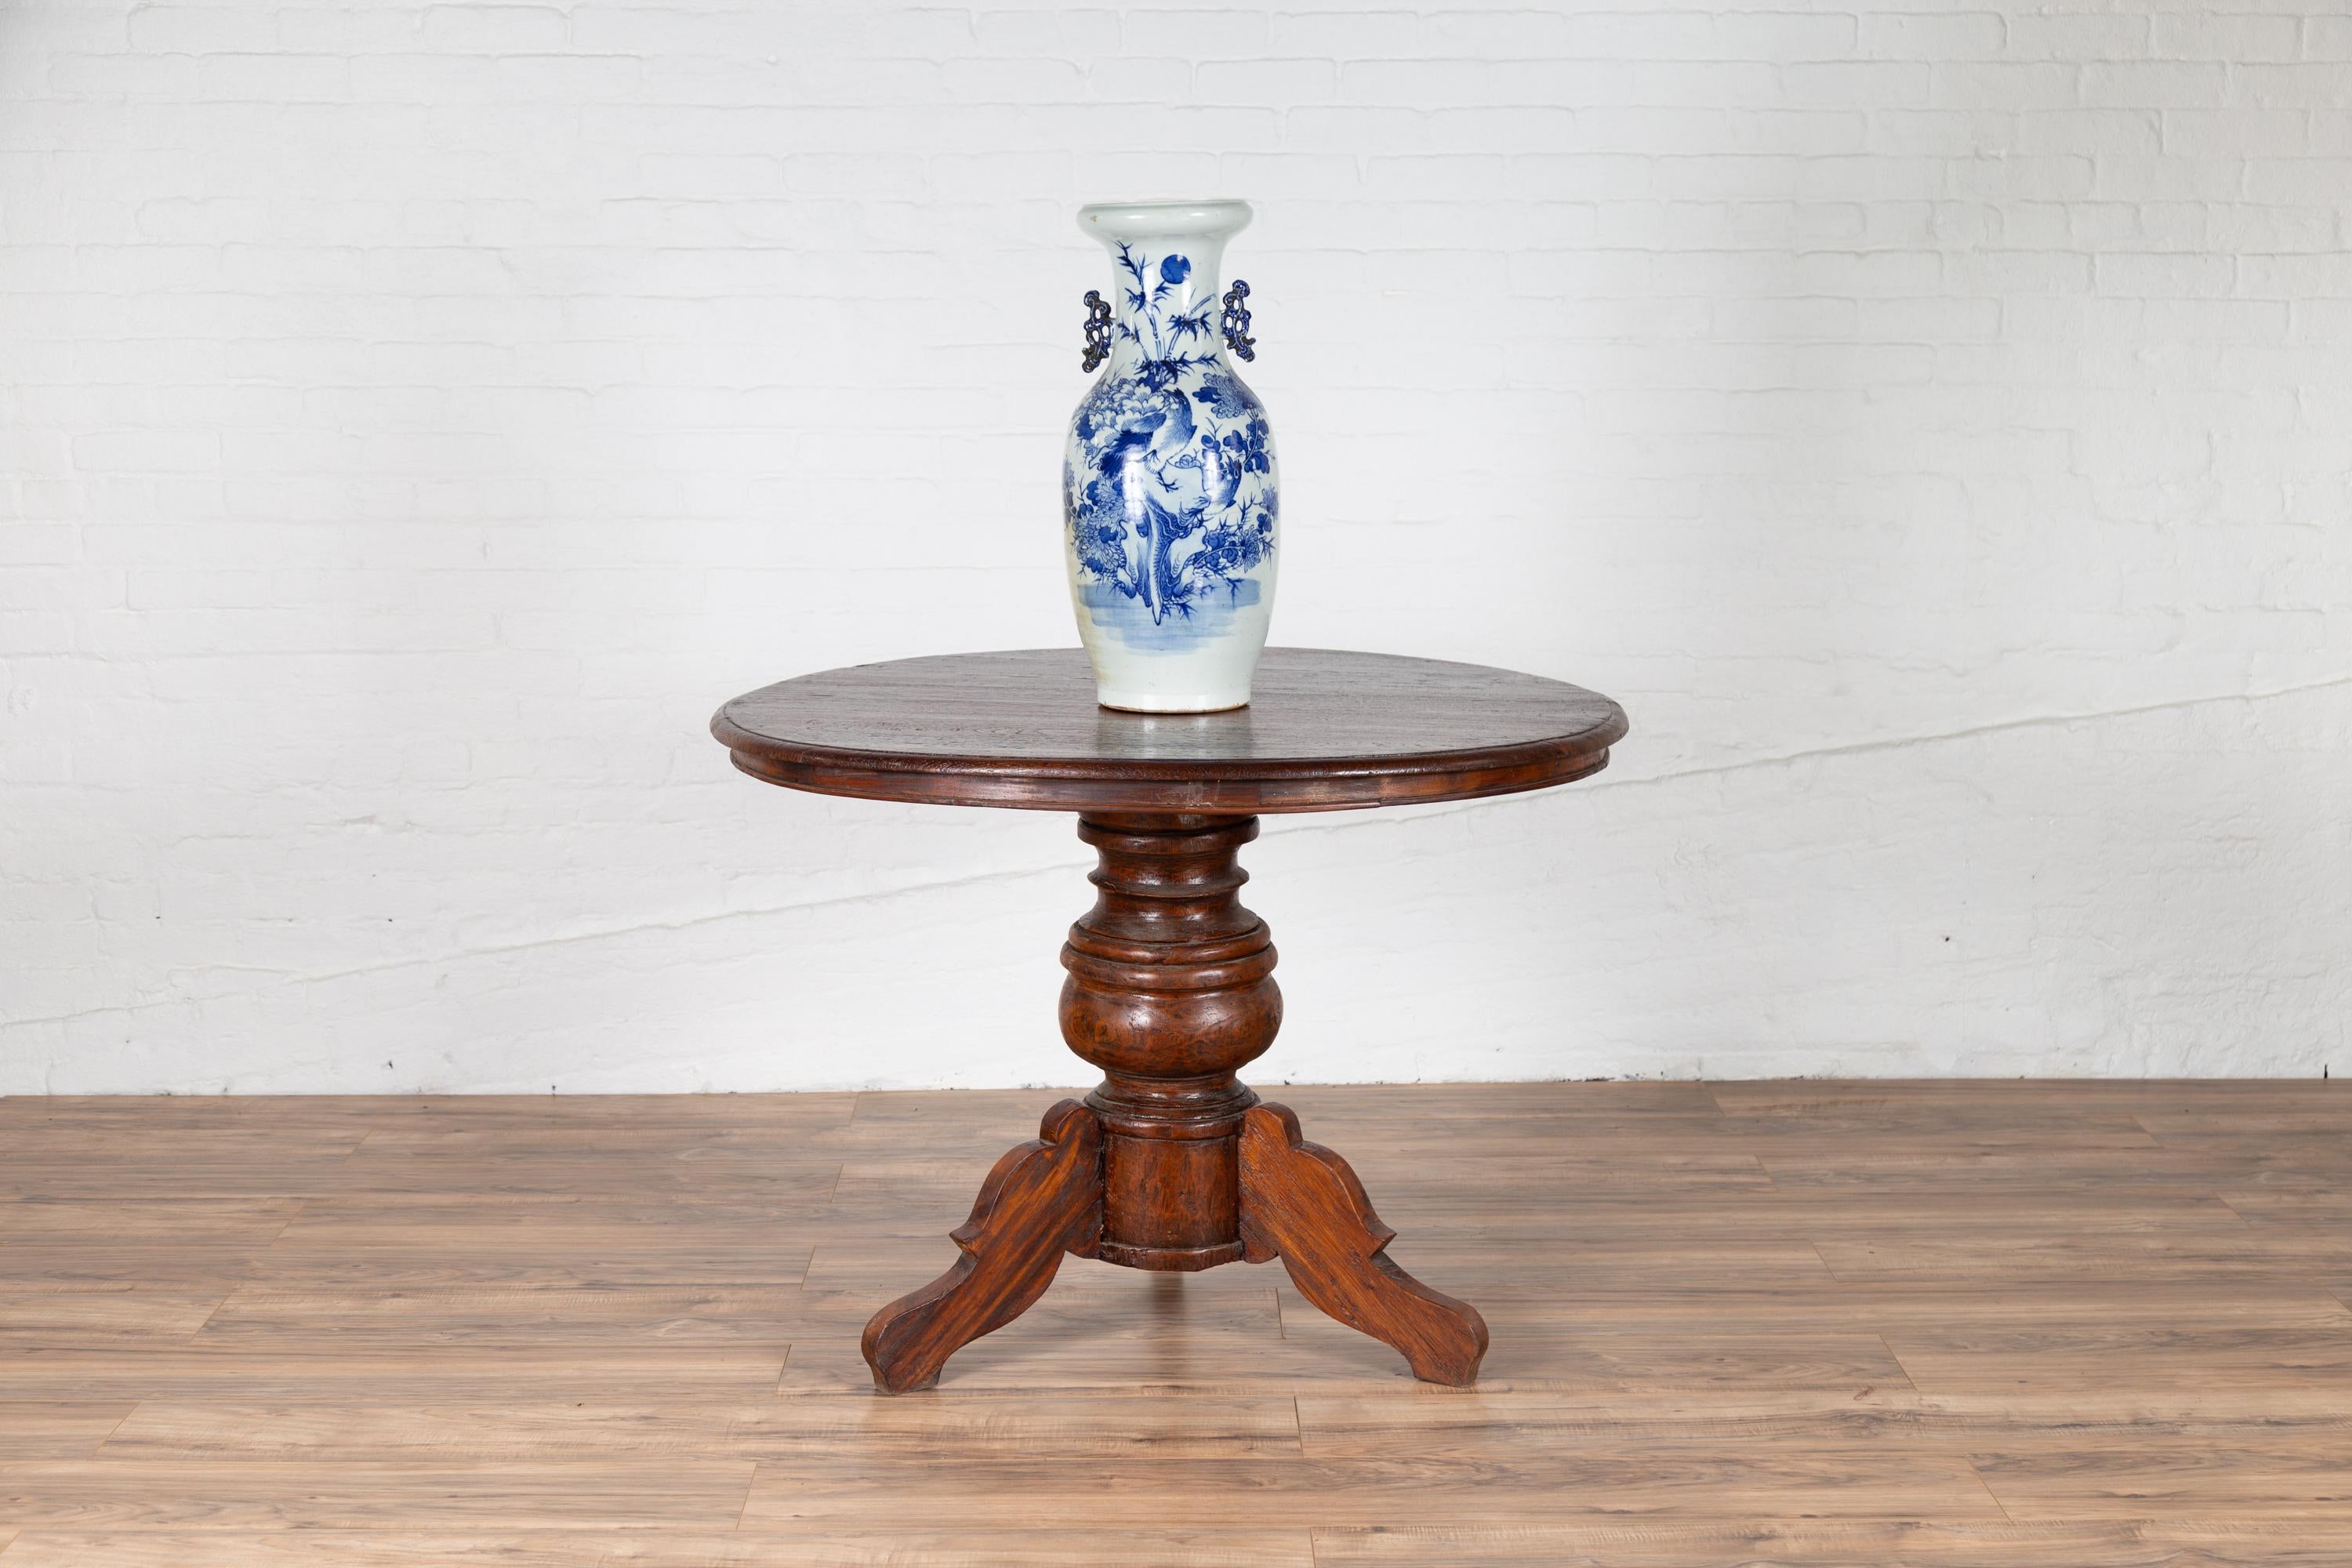 A Dutch Colonial Indonesian pedestal tripod table from the early 20th century, with circular top and turned base. Found in Java, this lovely pedestal table features a circular planked top sitting above a turned base, resting on three scrolling feet.